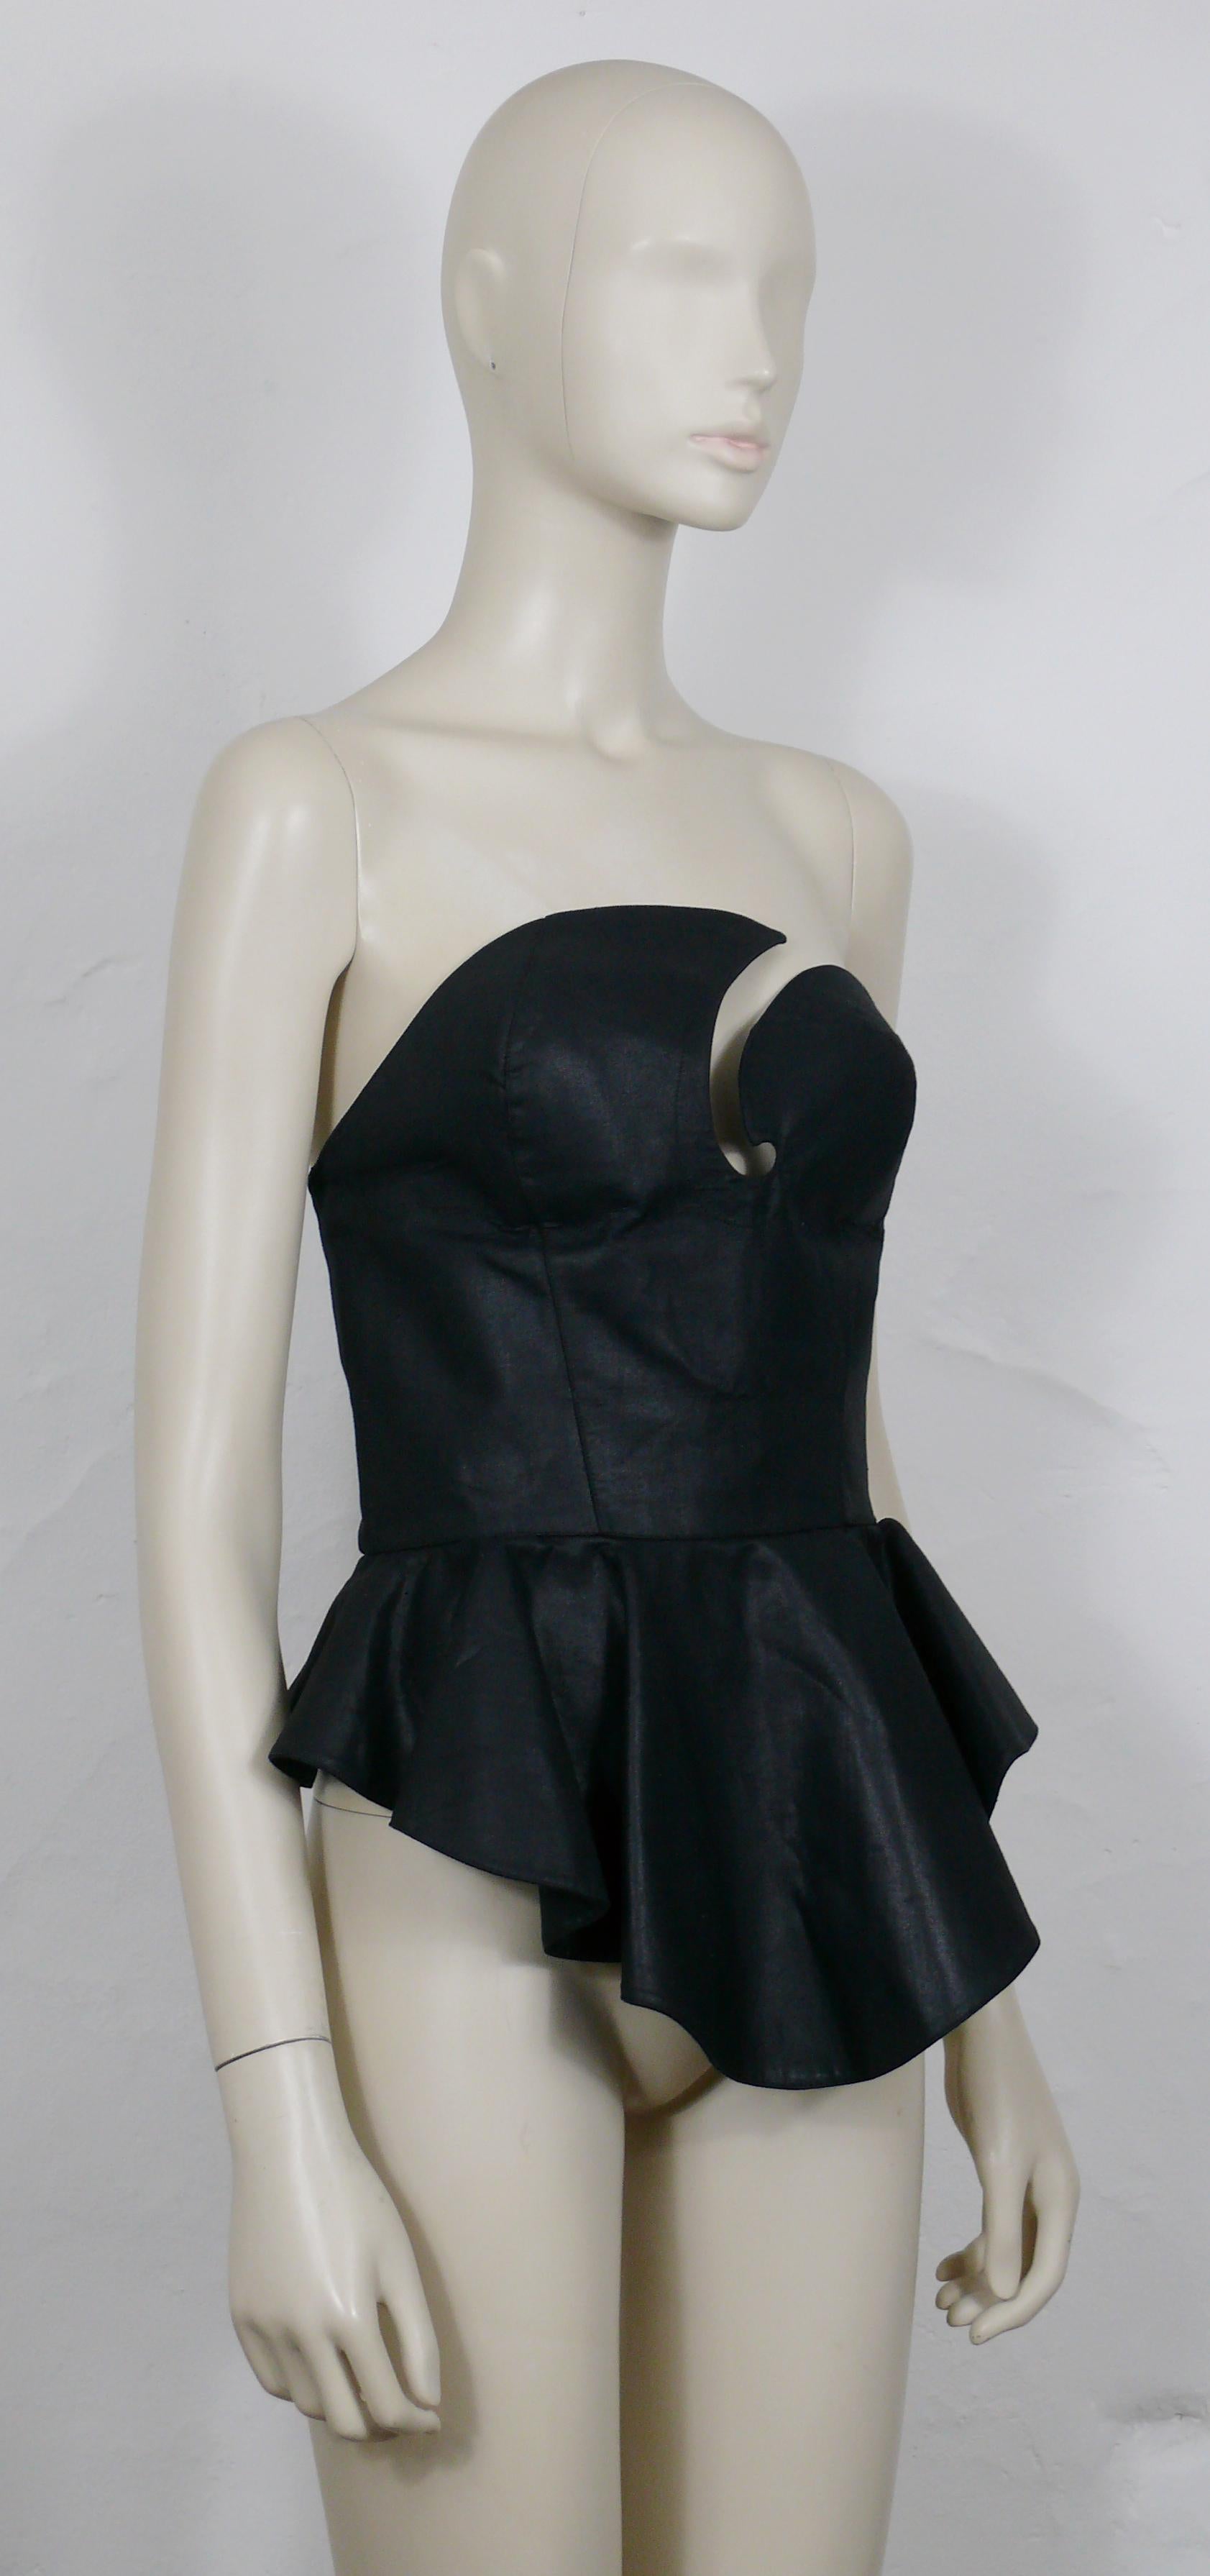 THIERRY MUGLER vintage iconic black bustier corset.

This bustier features :
- Black fabric (probably coated cotton).
- Asymetric bust.
- Basques.
- Back snap button down closure.
- Unlined. 

Label reads THIERRY MUGLER Paris.
Made in France.

Size